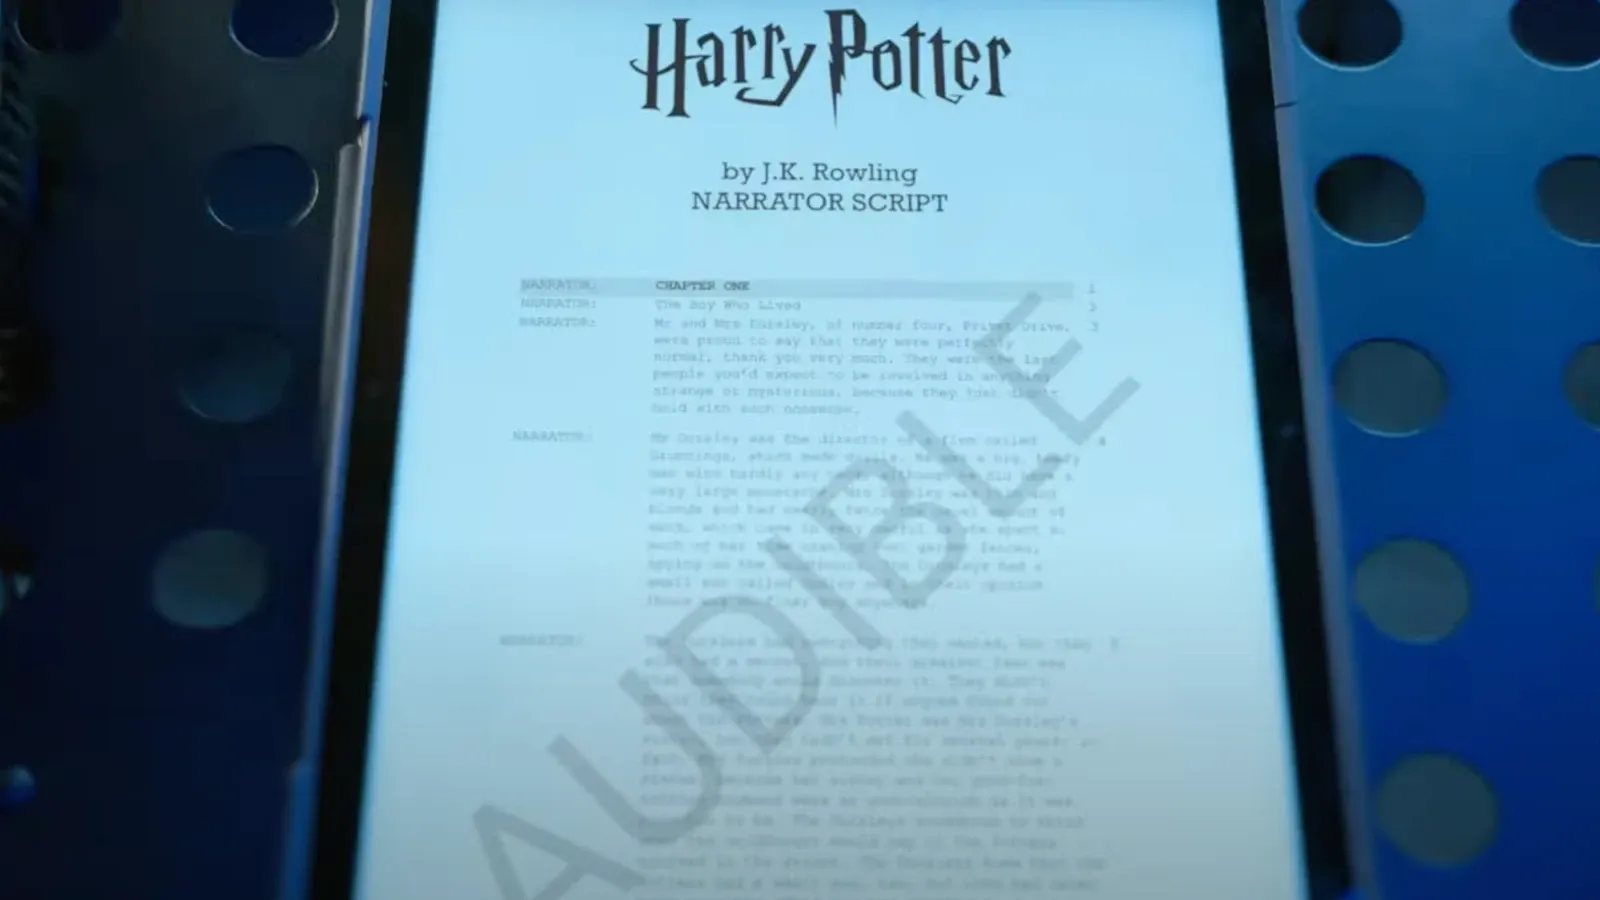 Full-cast Harry Potter audiobooks coming to Audible in late 2025